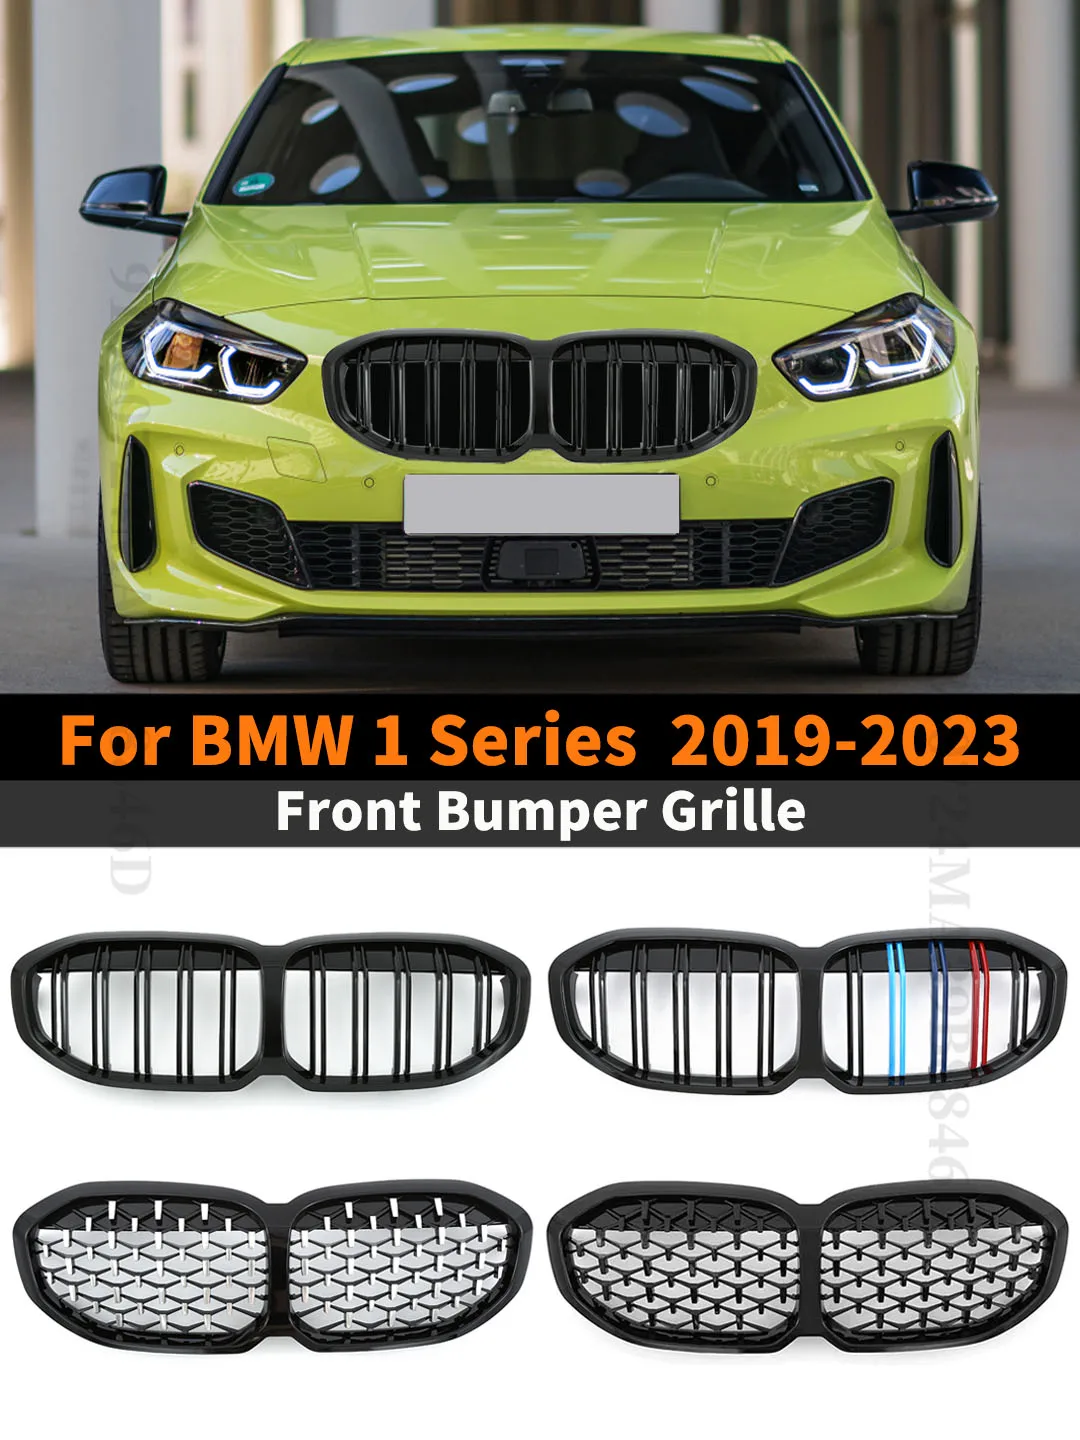 

For BMW F40 1 Series 2019-2023 128ti M135i xDrive 118i and M Sport Kidney Double Slat Diamond Grill Front Bumper Inlet Grille